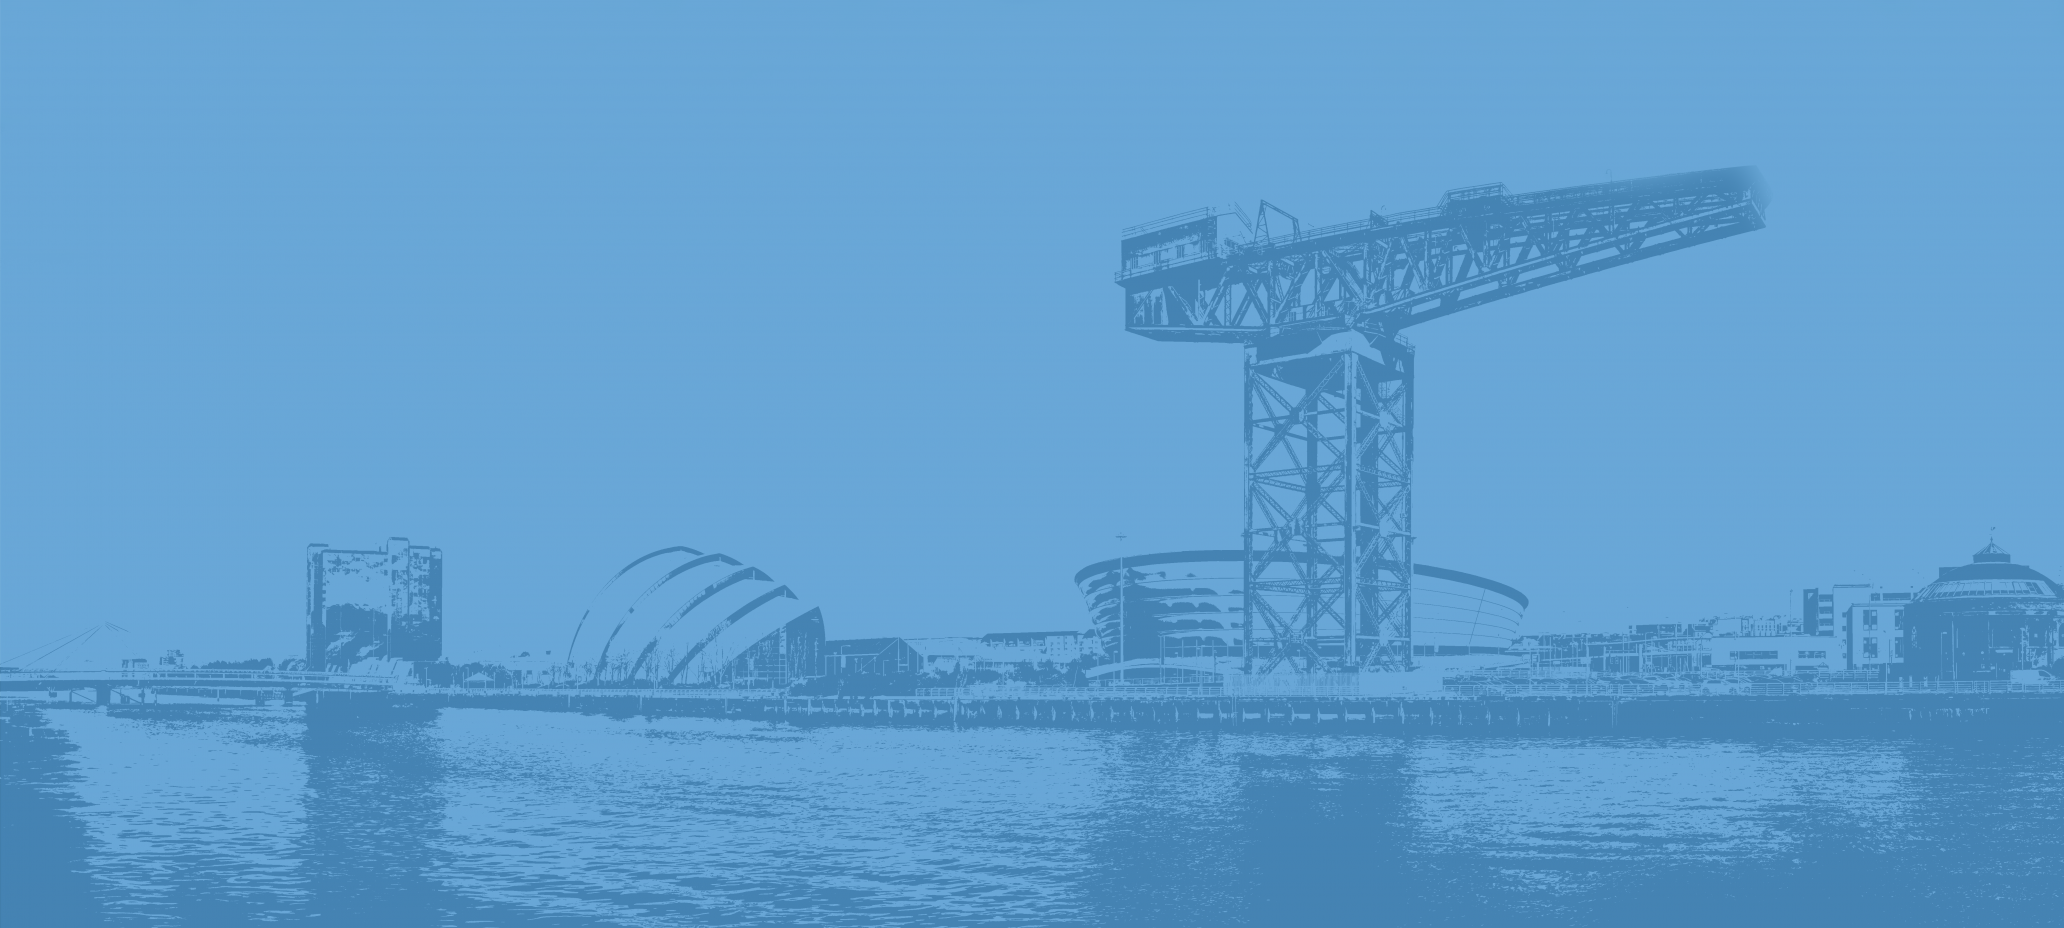 ICONIC MARITIME: Shipbuilding on the Clyde, then and now